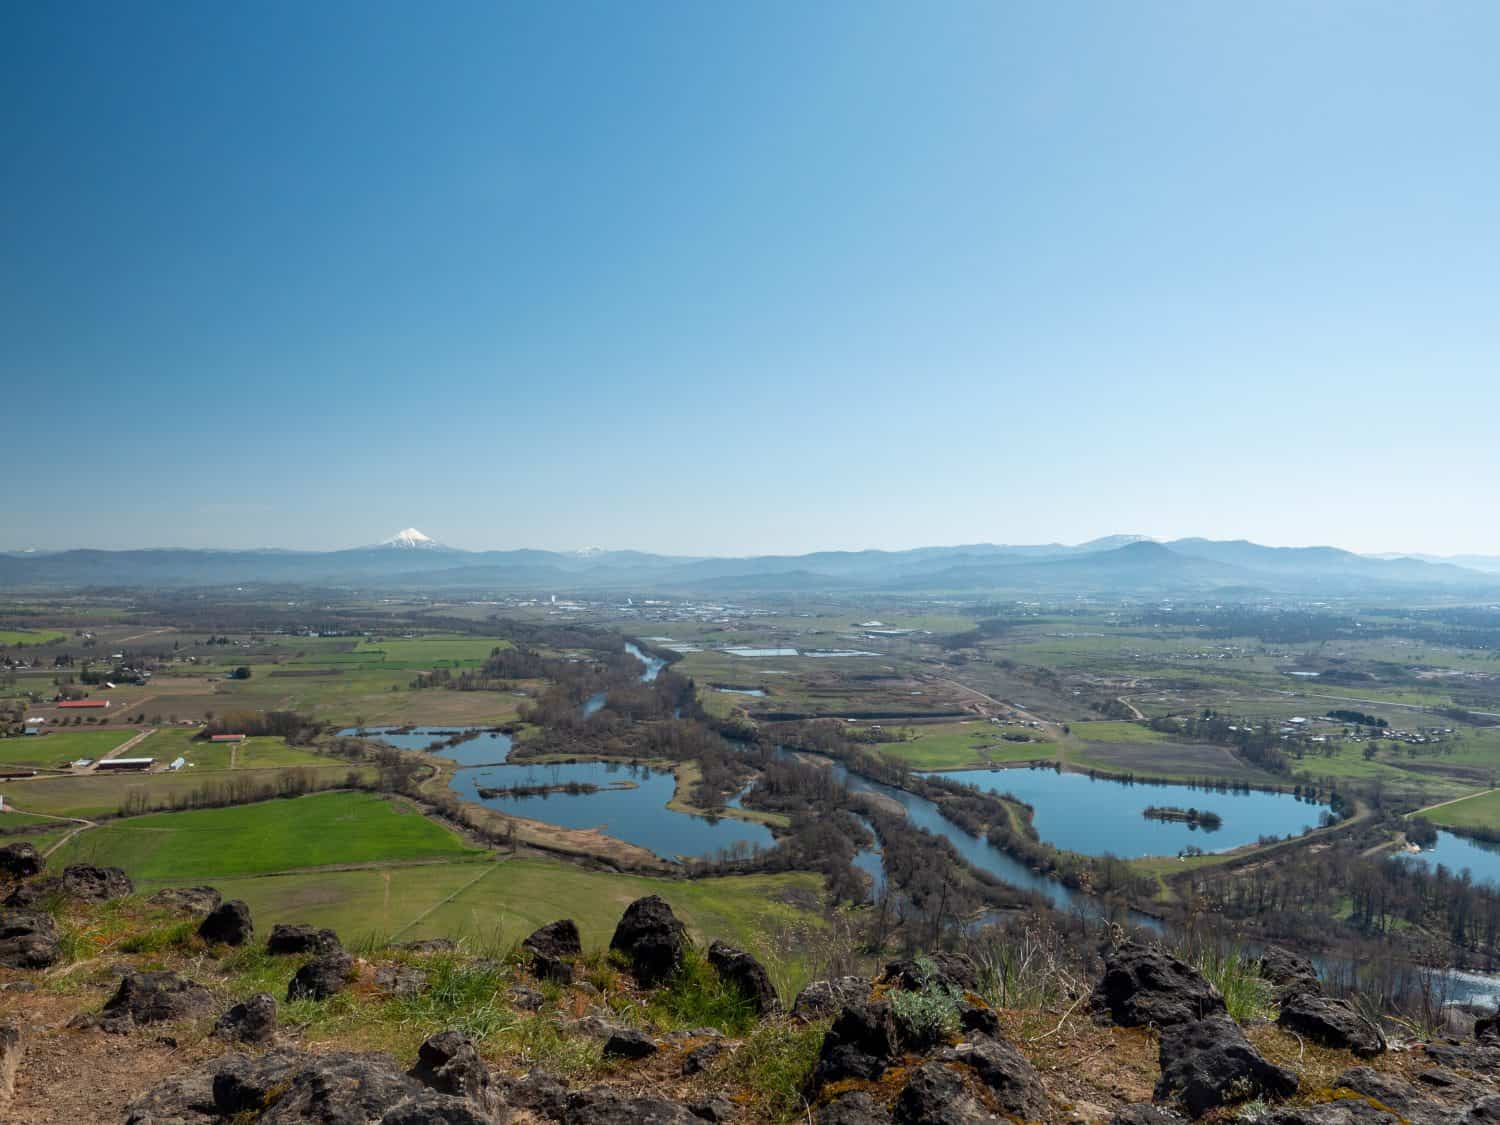 Beautiful landscape with negative space at top. Photo of the Rogue River valley on sunny spring day with the volcano Mt. McLoughlin in the background from Lower Table Rock near Medford, Oregon.